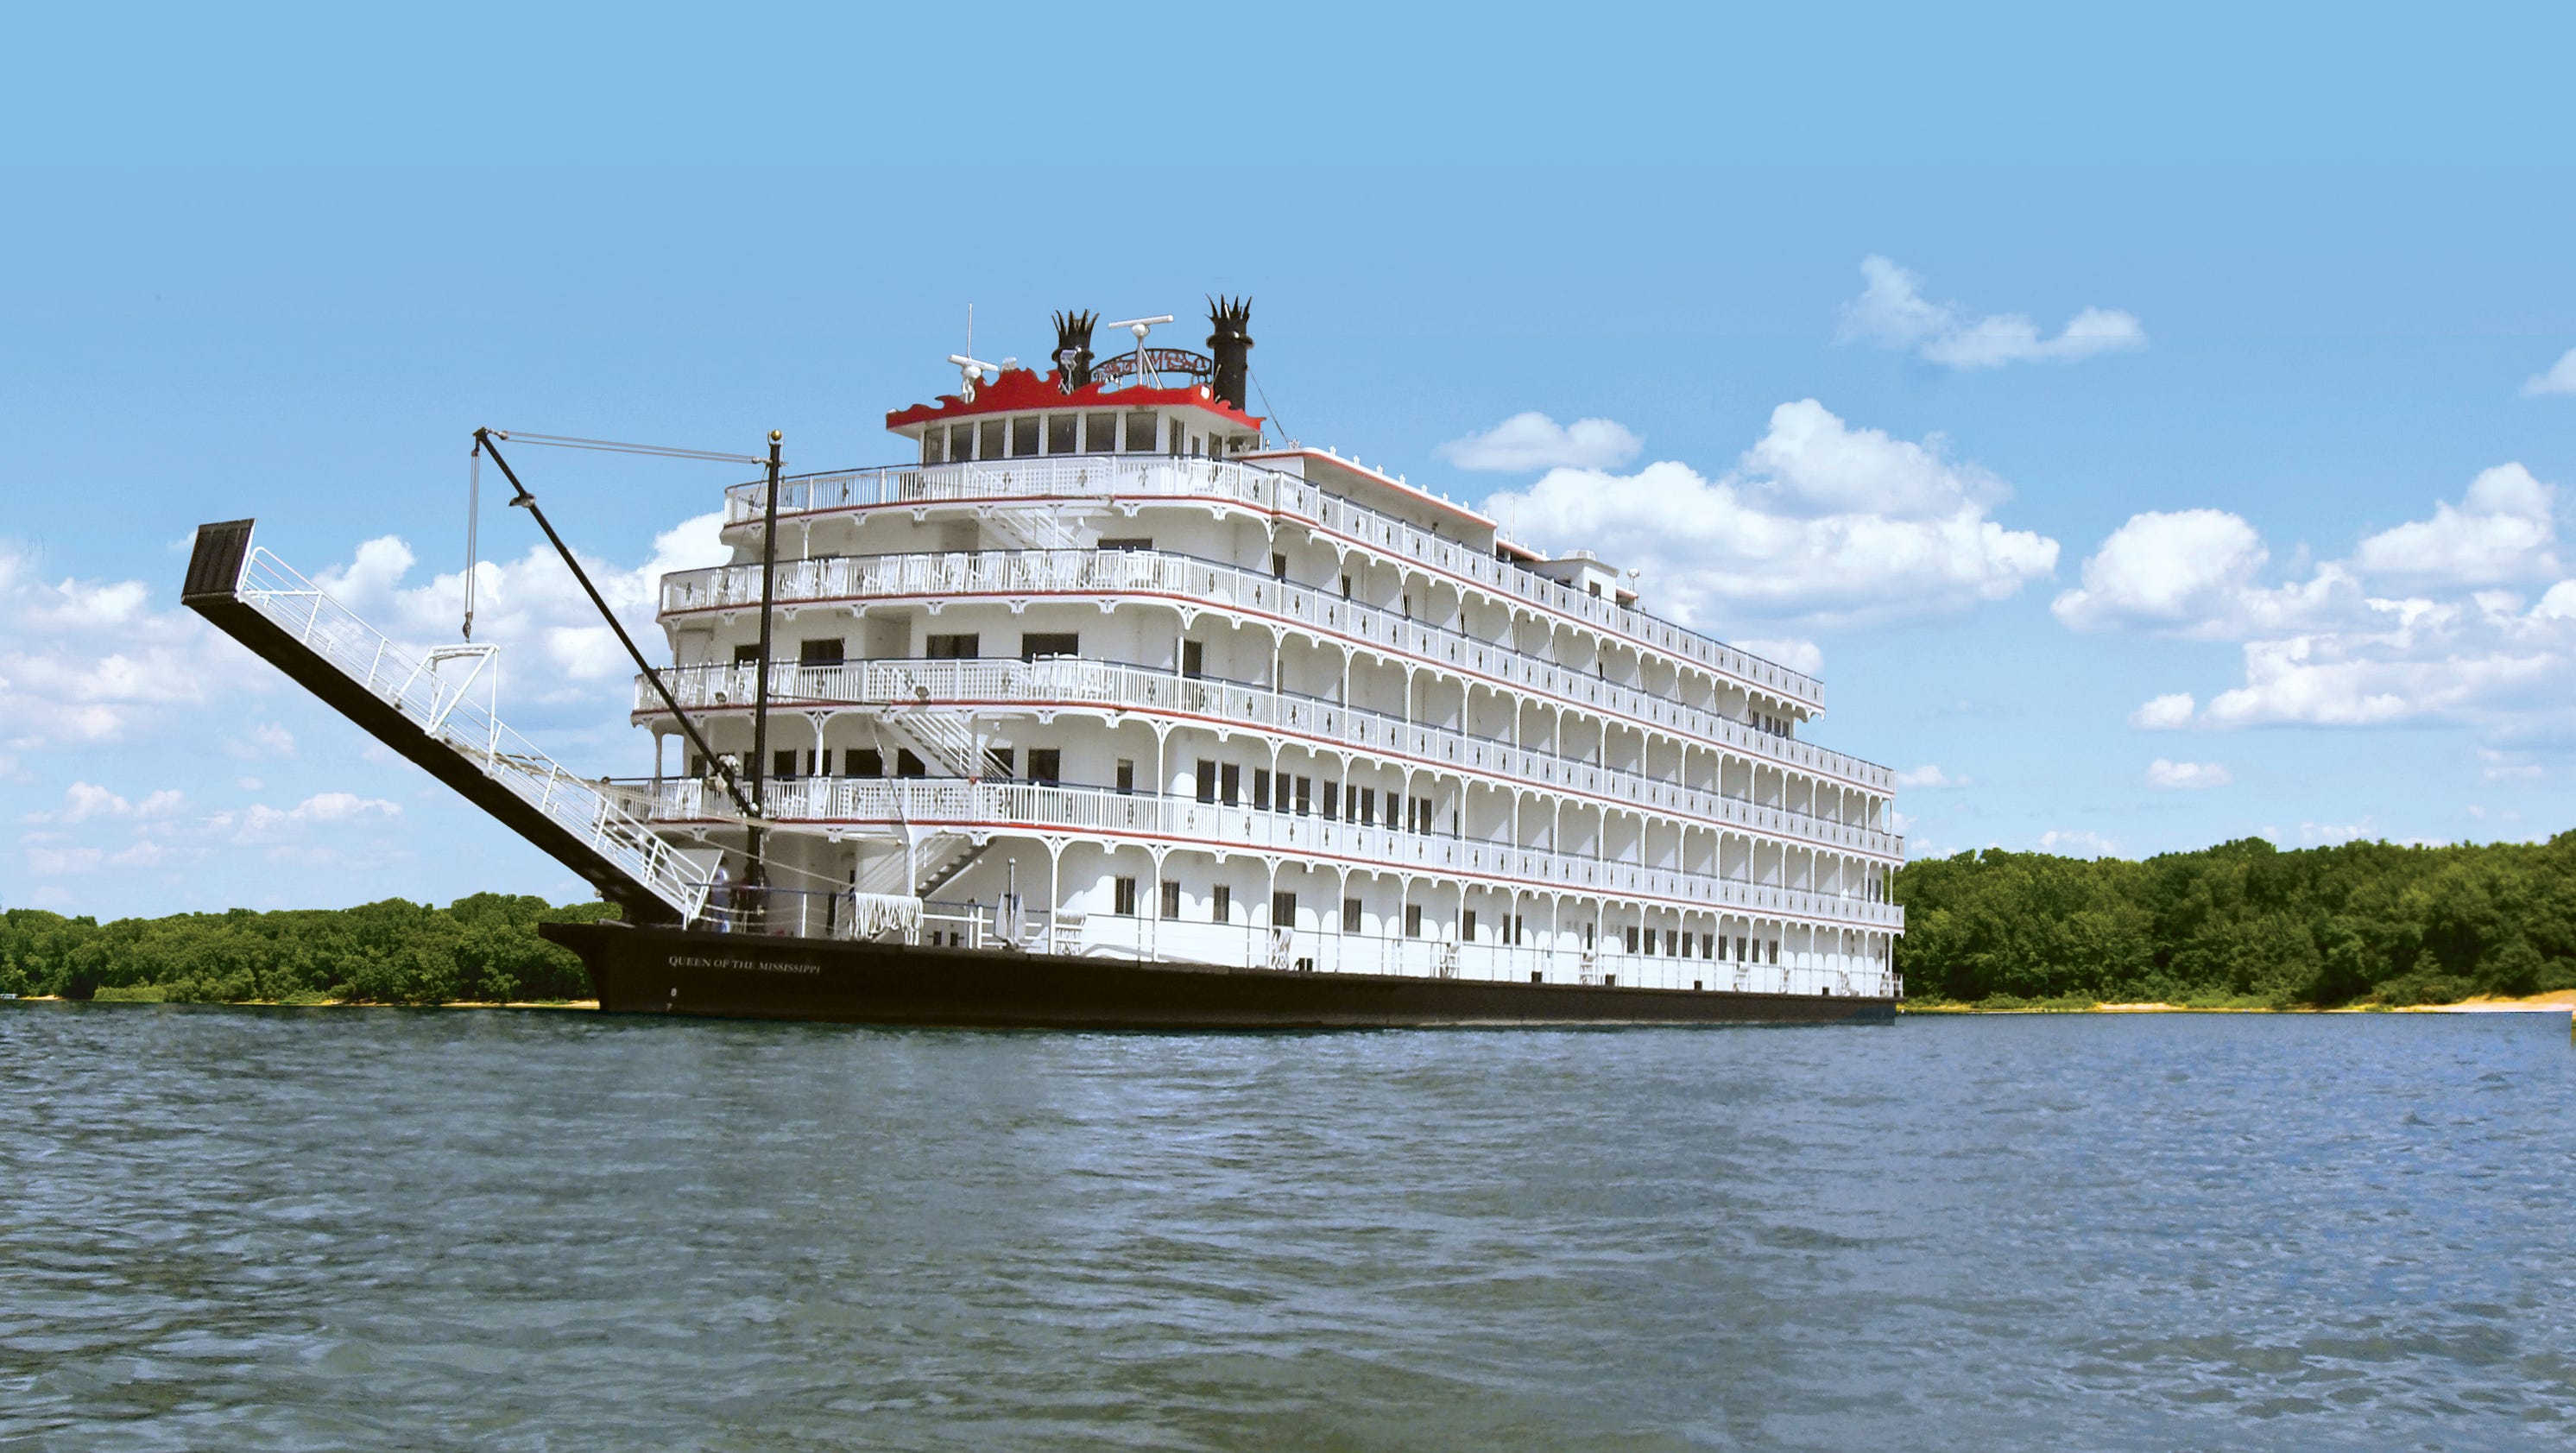 New paddle wheeler to debut on Columbia and Snake rivers